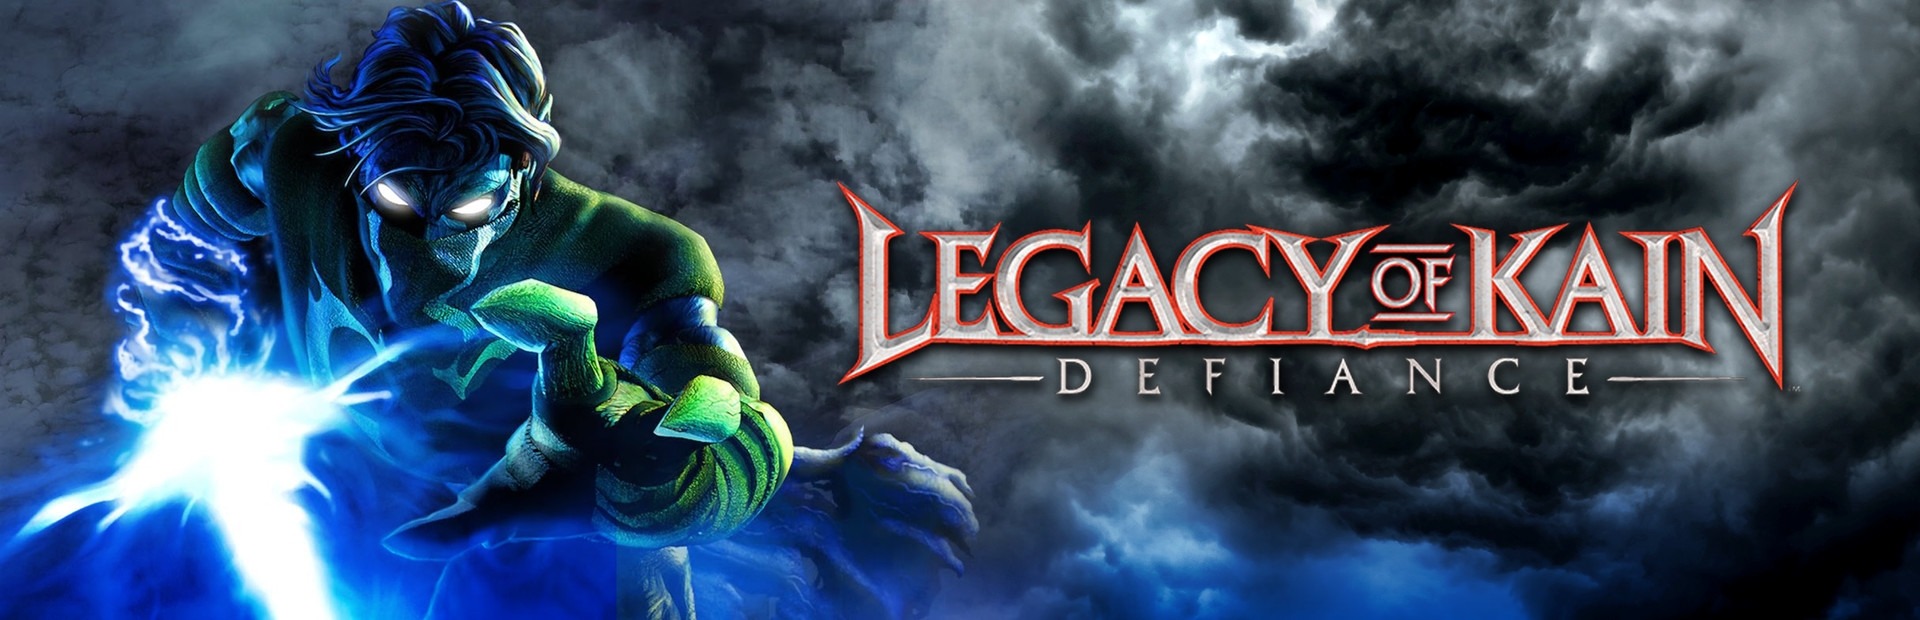 Legacy of kain steam фото 16